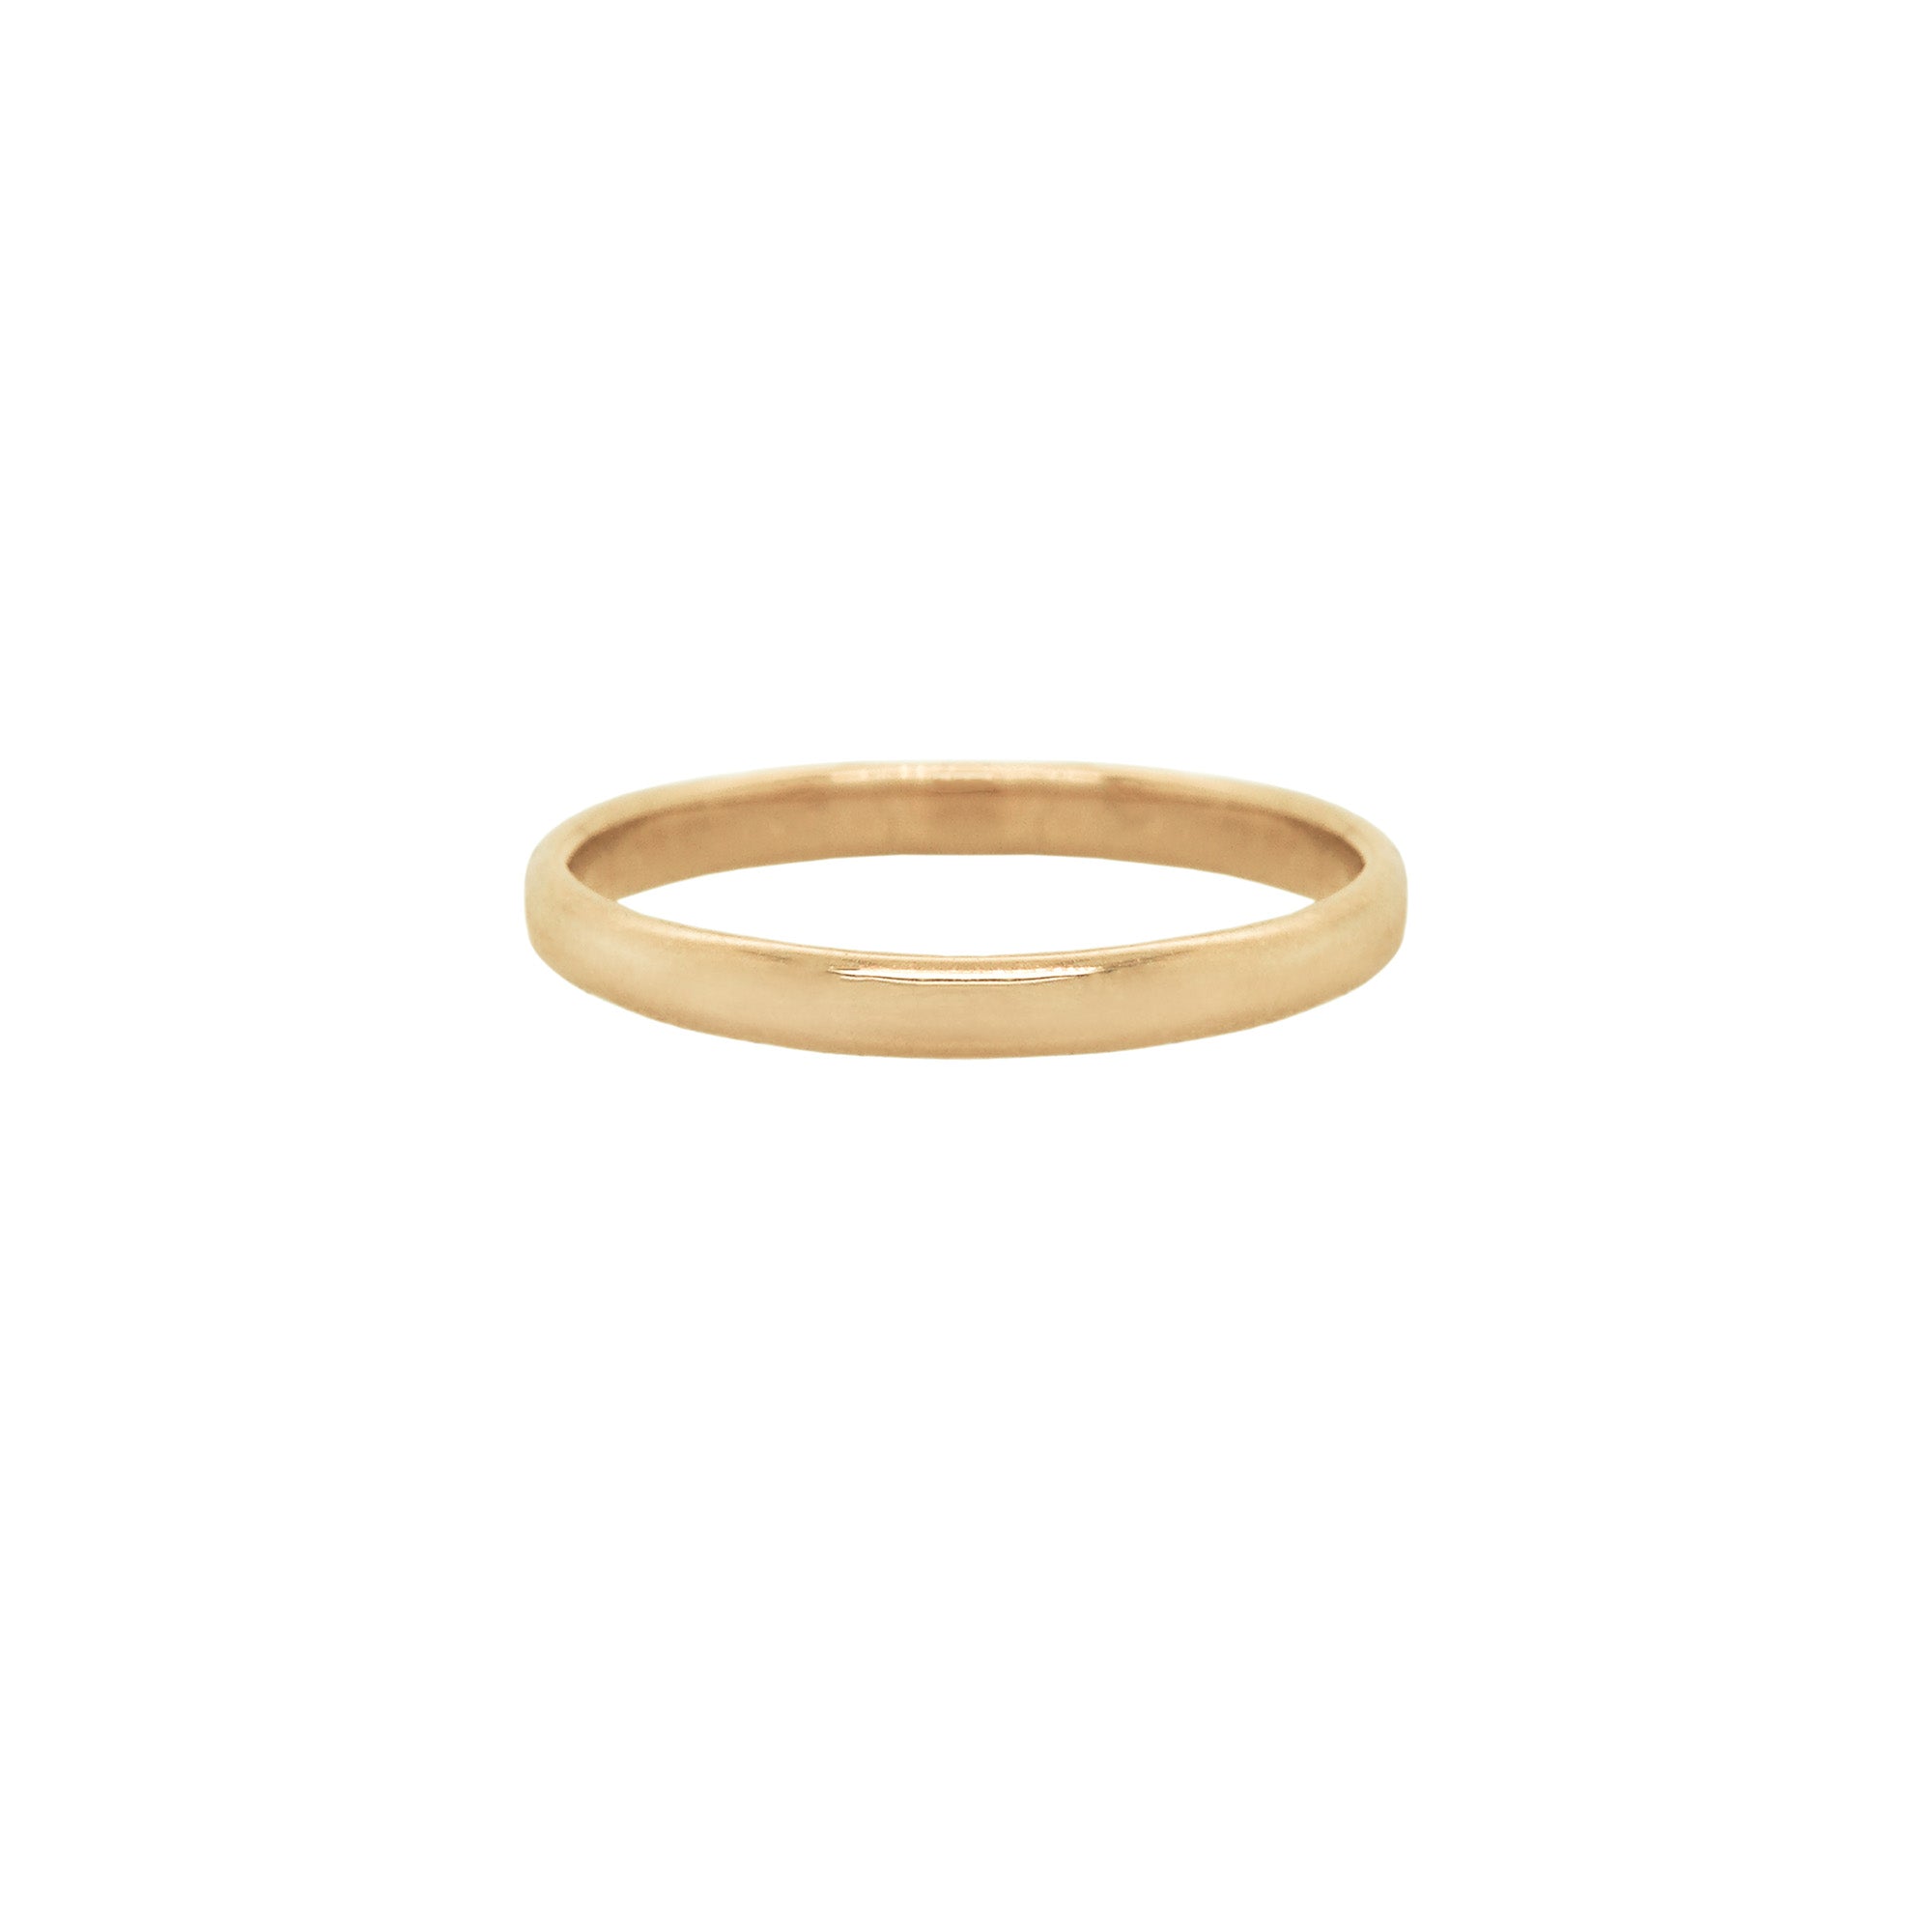 A stock photo of Laurie Fleming Jewellery's plain solid gold "Wisteria" band, a 2mm wide stacking ring/wedding band, handmade in Toronto. The ring is on a white background.